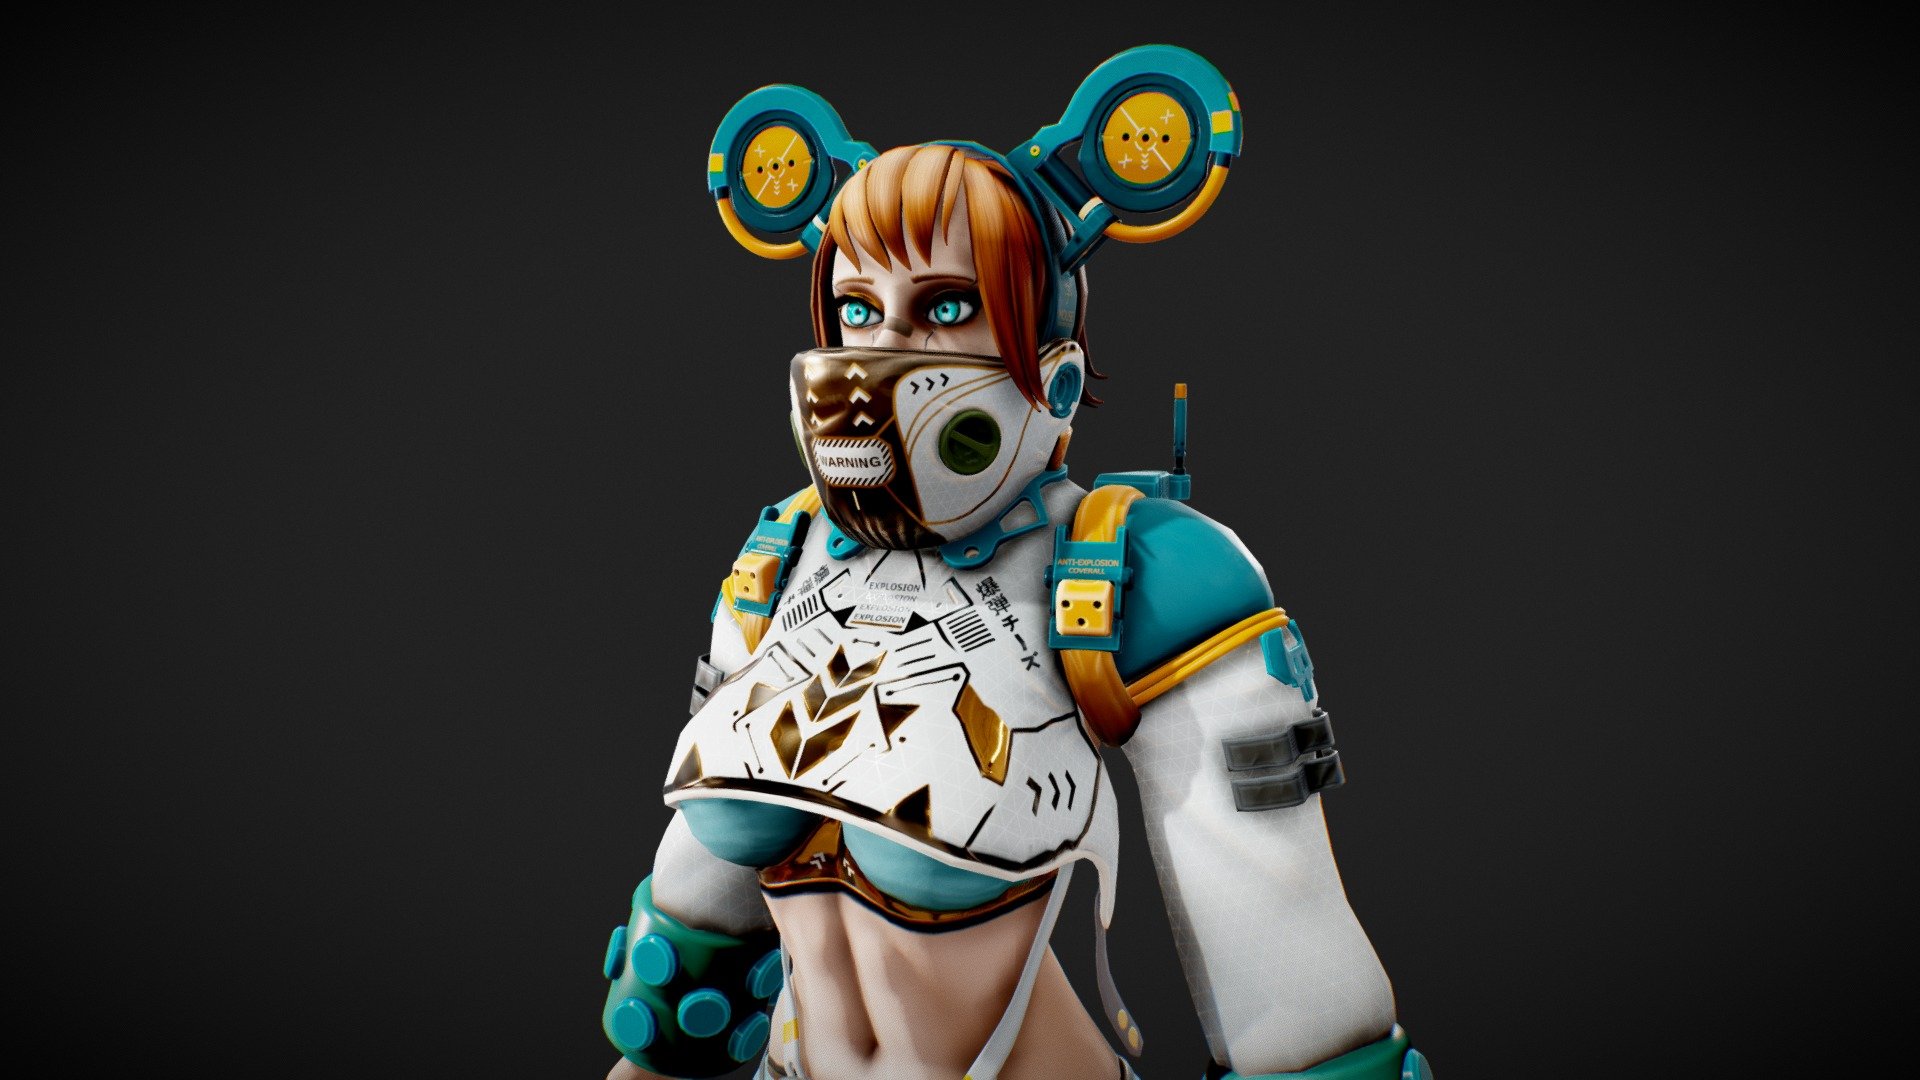 Game-ready character for your projects. Original design, futuristic look, cyberpunk style.

Contains a character and a gun.
Screenshots: https://www.artstation.com/artwork/NxO9WP




55k polys (104k tris)

Rigged

Contains no sounds and animations

Textures: 2048x2048 PNG

Textures include Generic PBR/Unity Standard/Unity HD Render Pipeline/Unreal sets

6 Materials for the characters

1 Material for the gun
 - Sci-Fi Cyberpunk Girl - Buy Royalty Free 3D model by amazingStanley 3d model